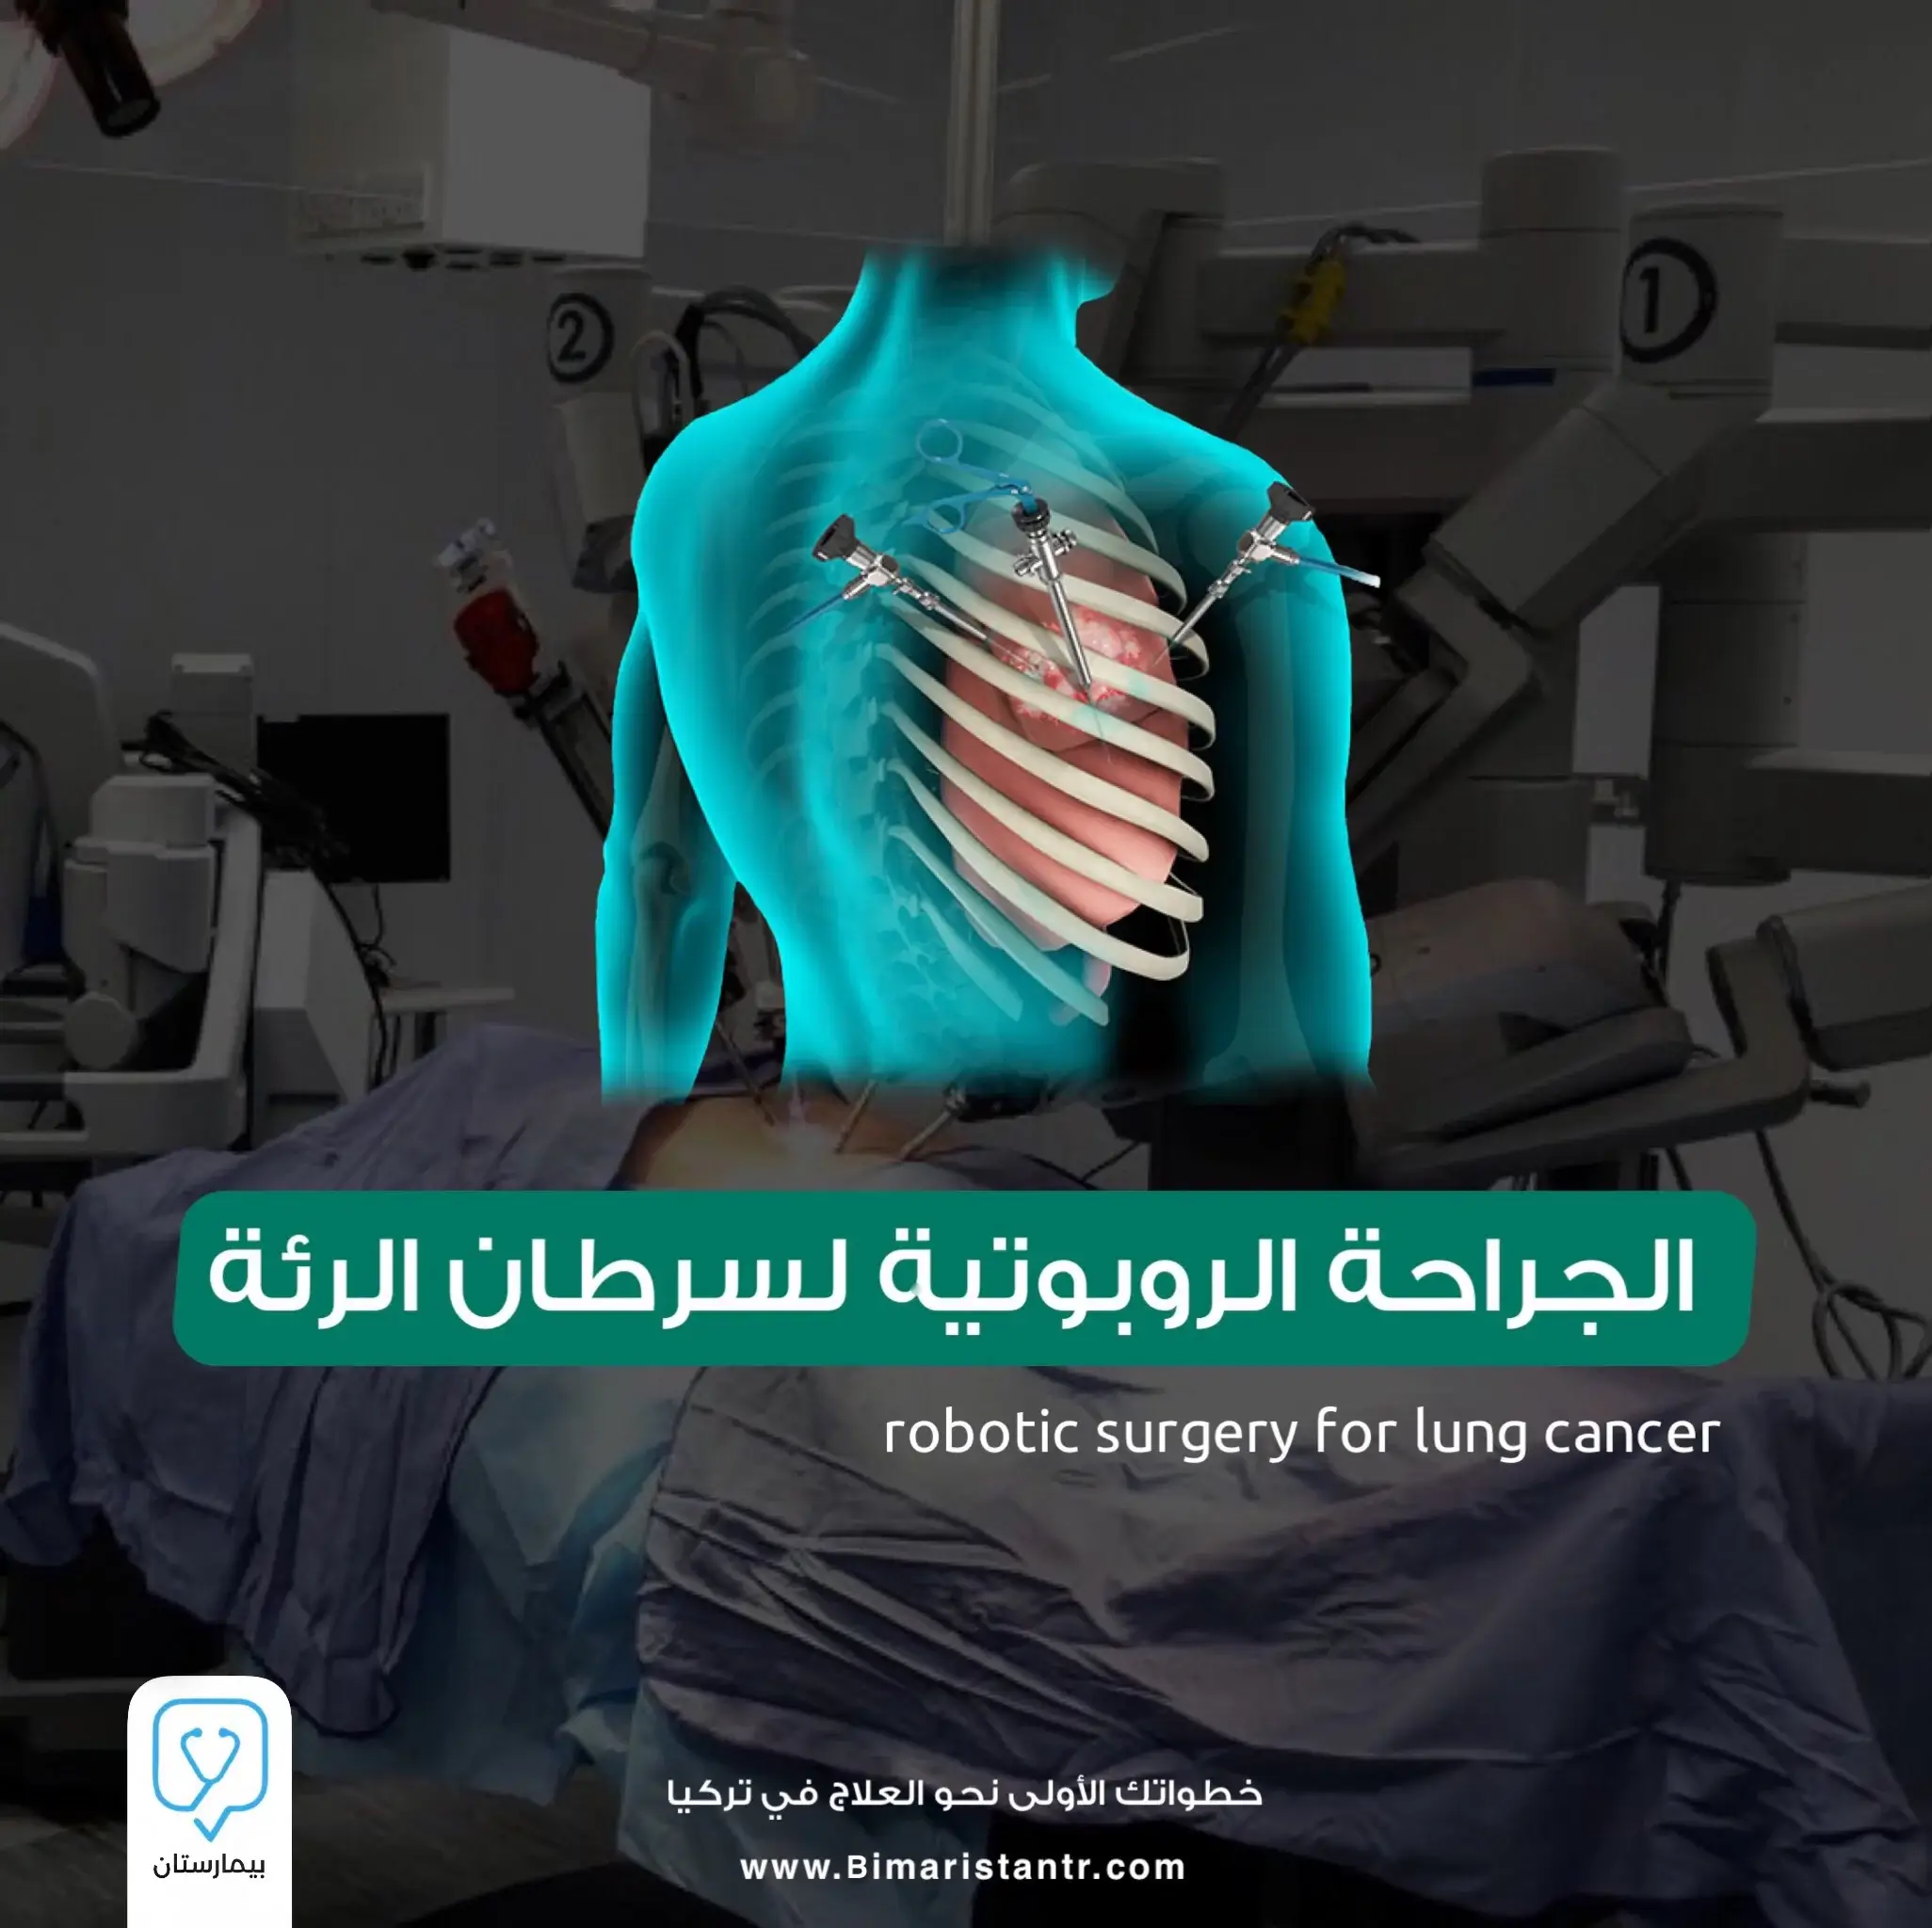 Robotic surgery for lung cancer in Turkey